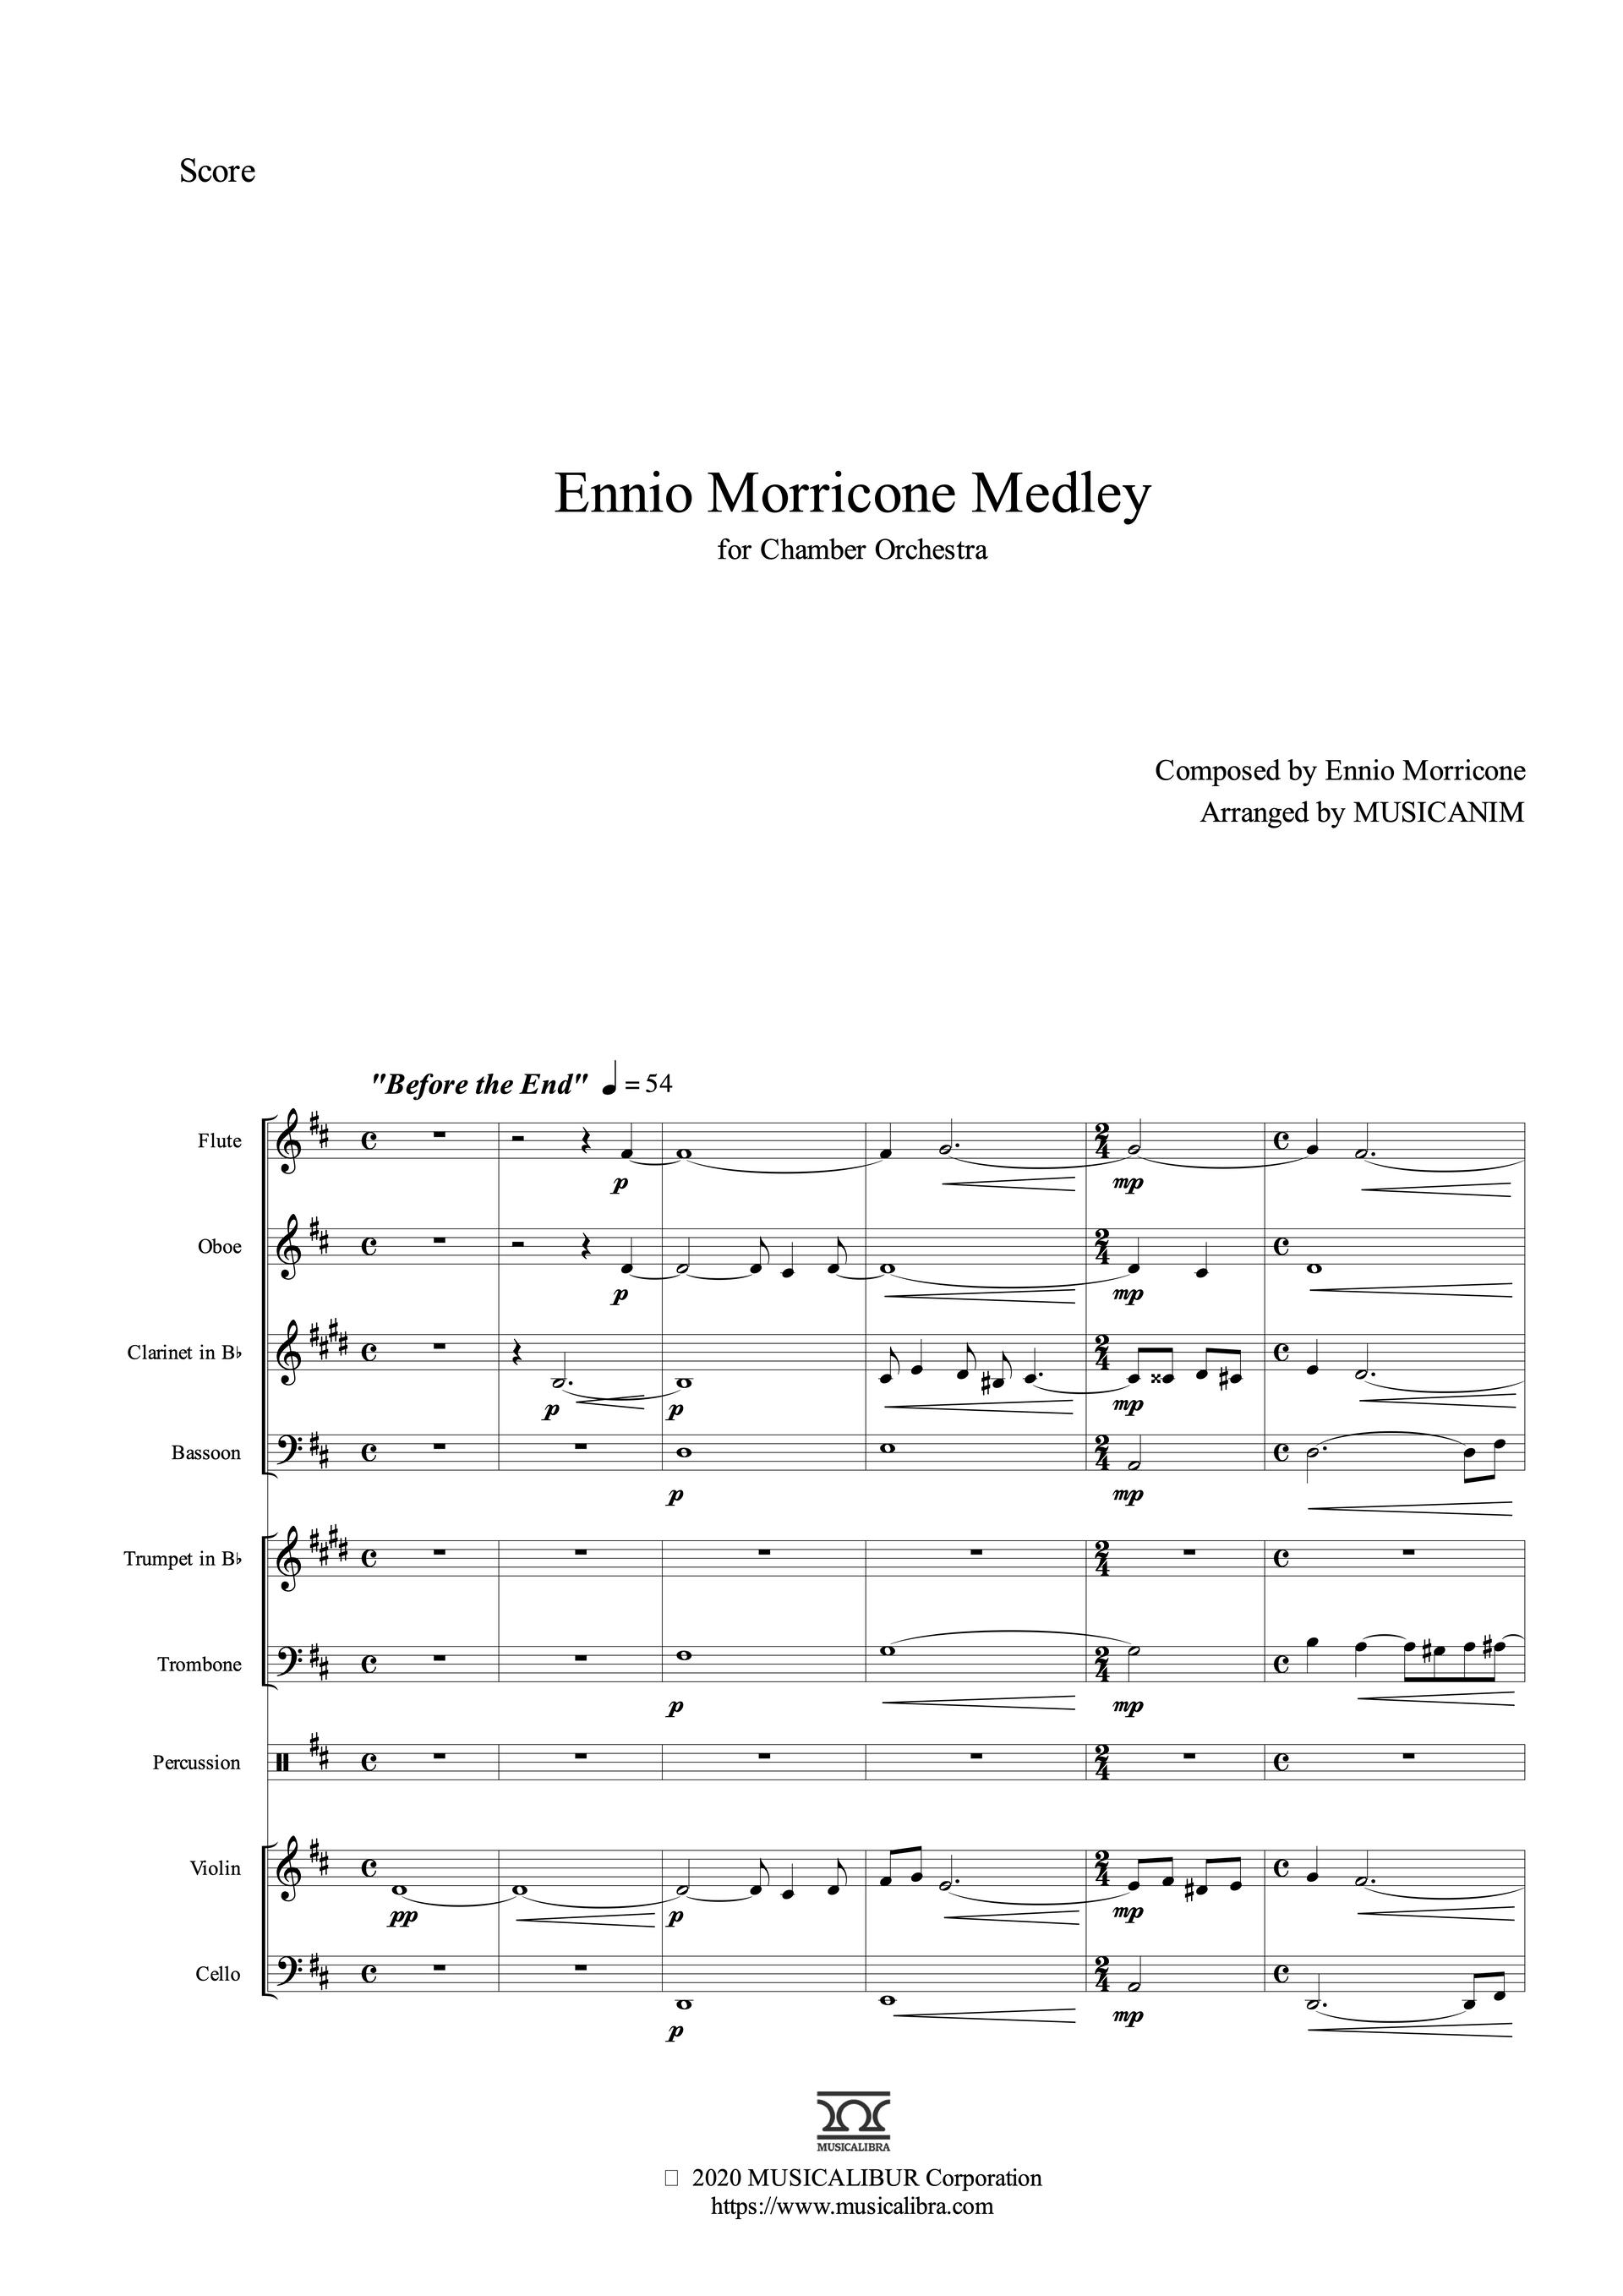 Sheet music of Ennio Morricone Medley arranged for chamber orchestra preview page 1